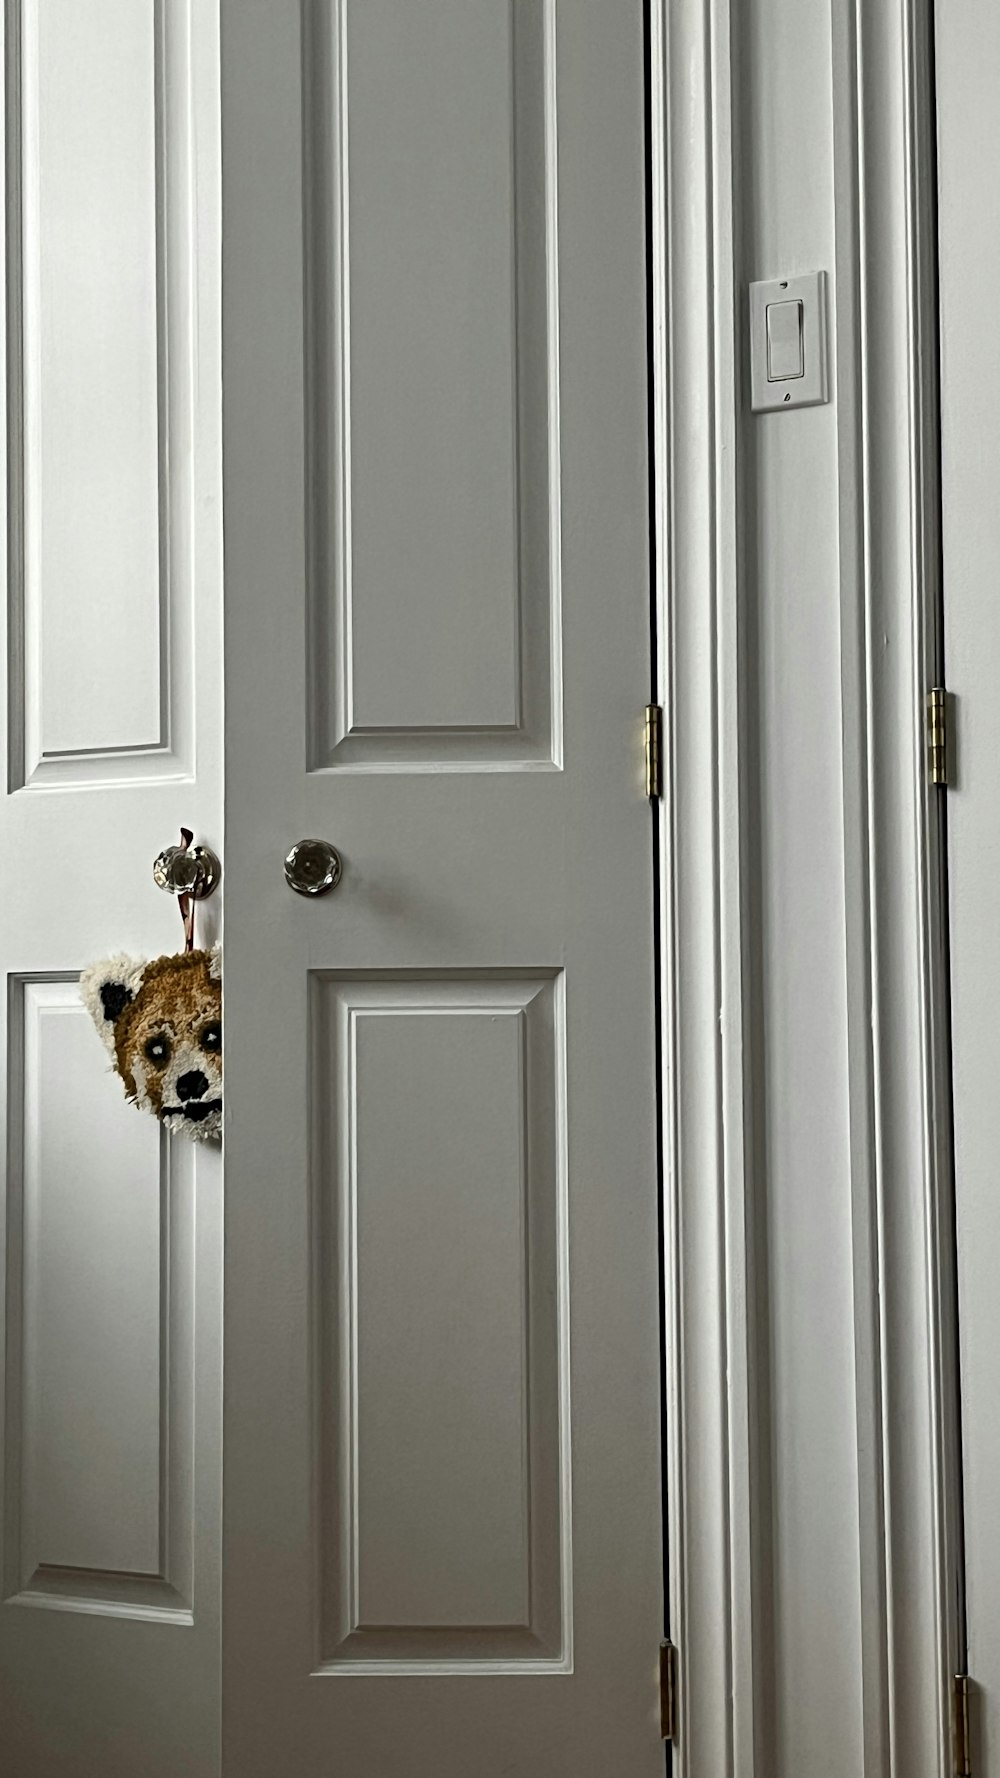 a door with a stuffed animal peeking out of it